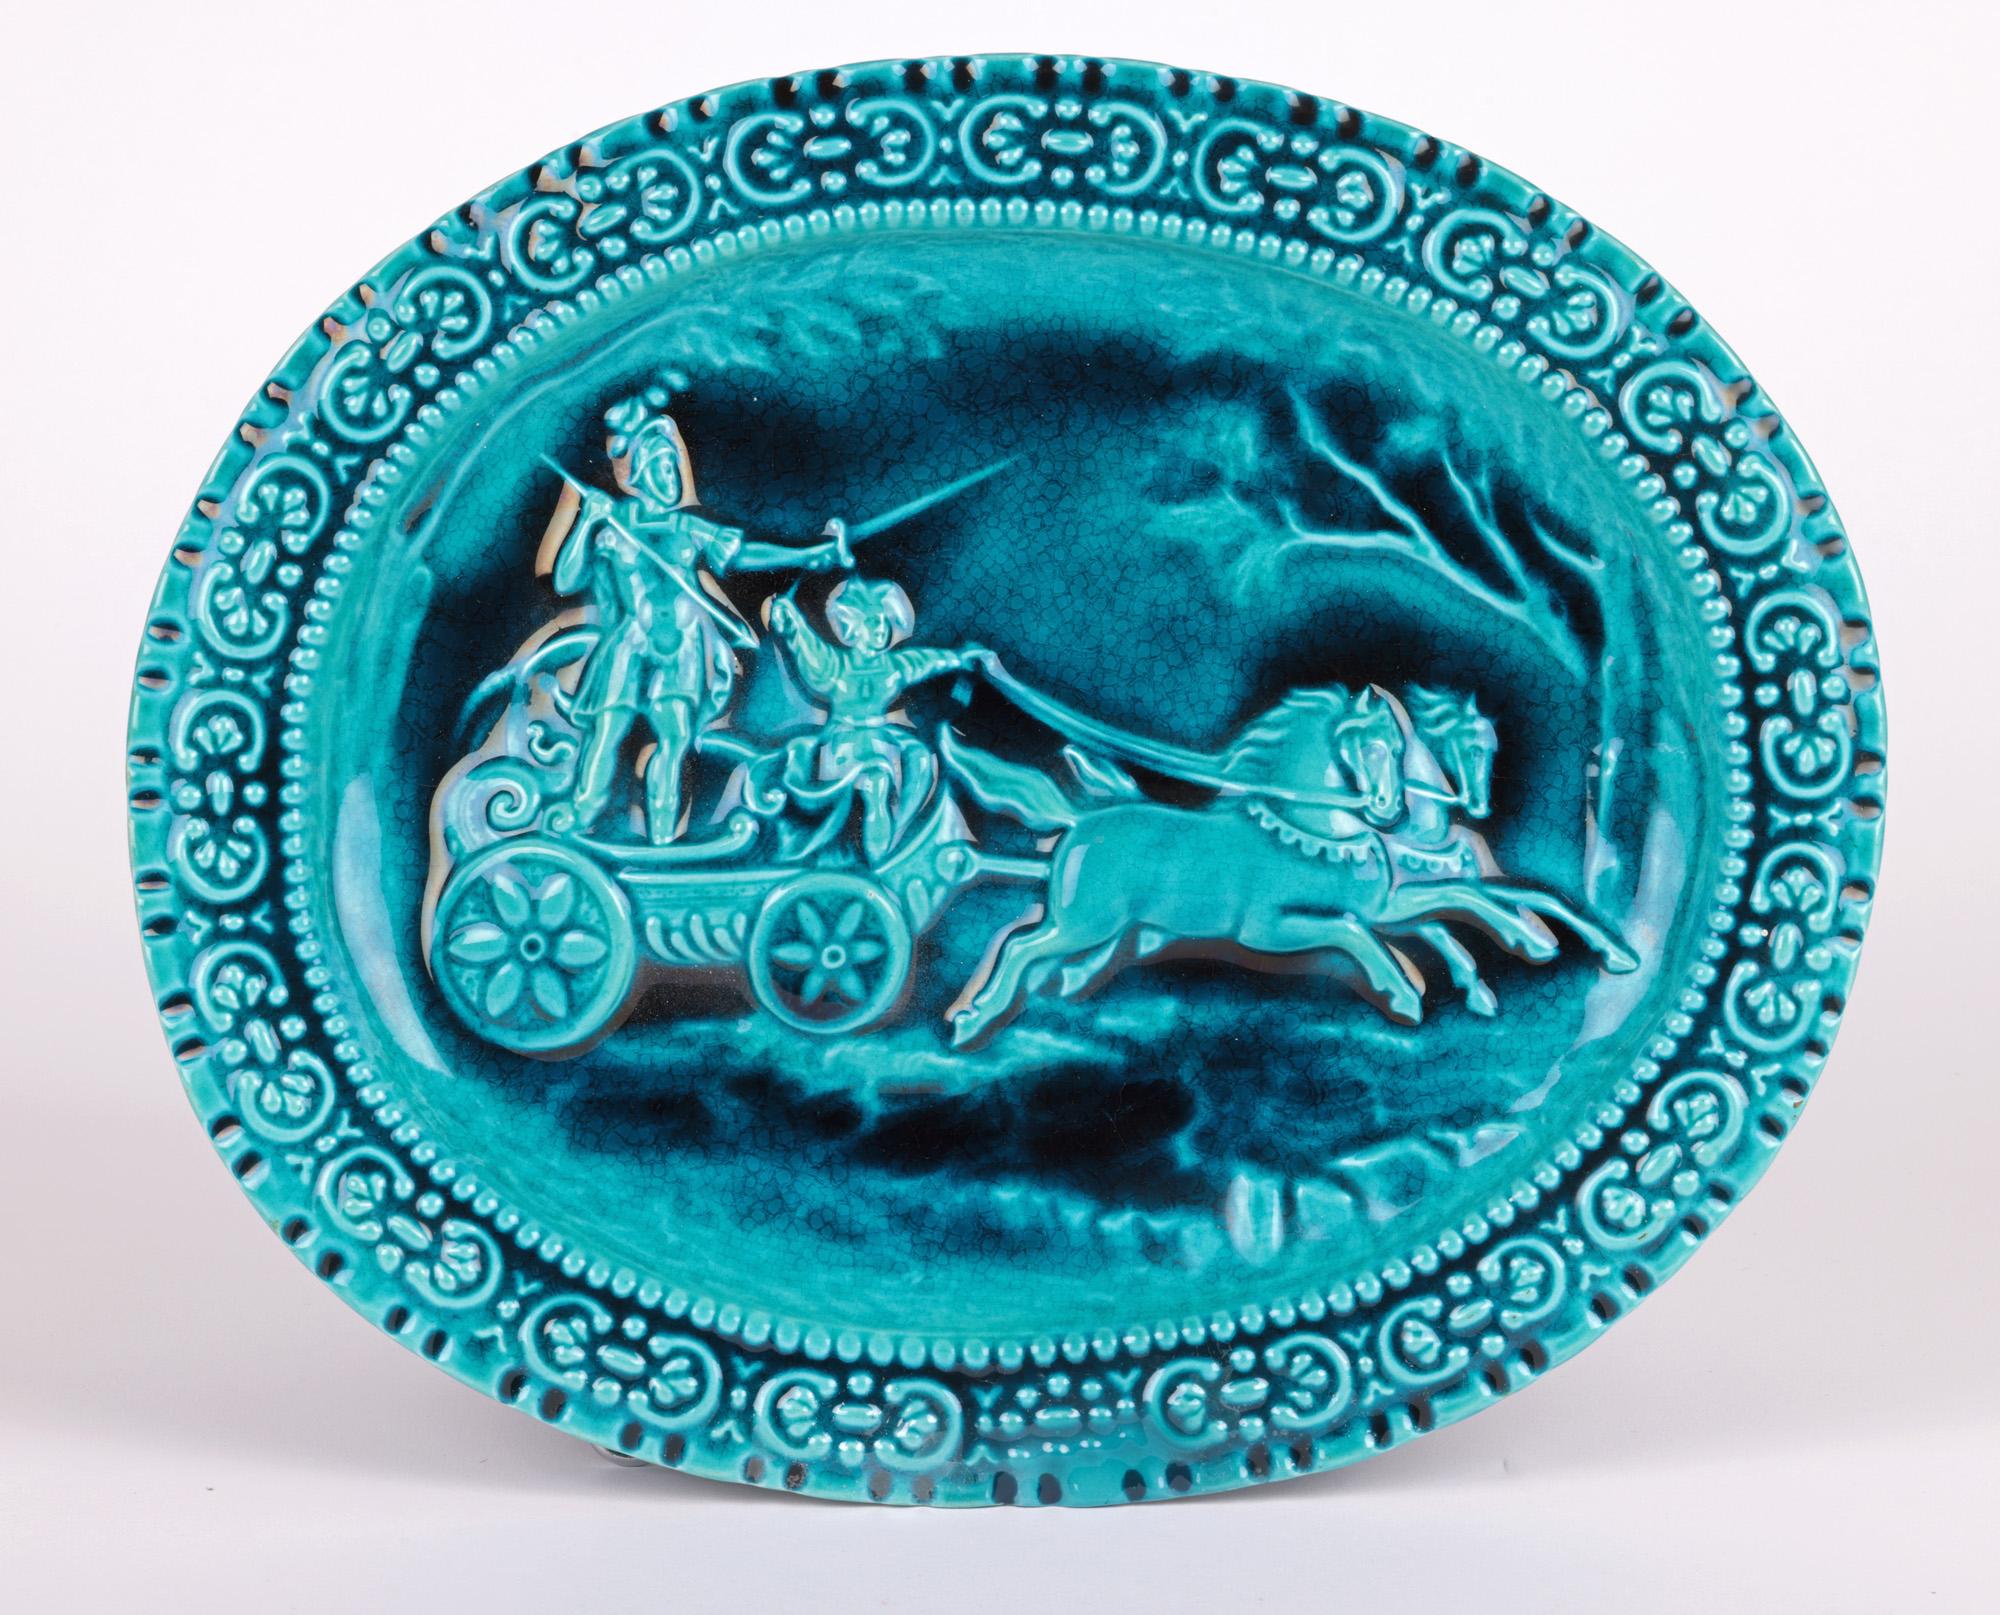 Maw & Co Walter Crane Majolica Chariot Art Pottery Plaque For Sale 6